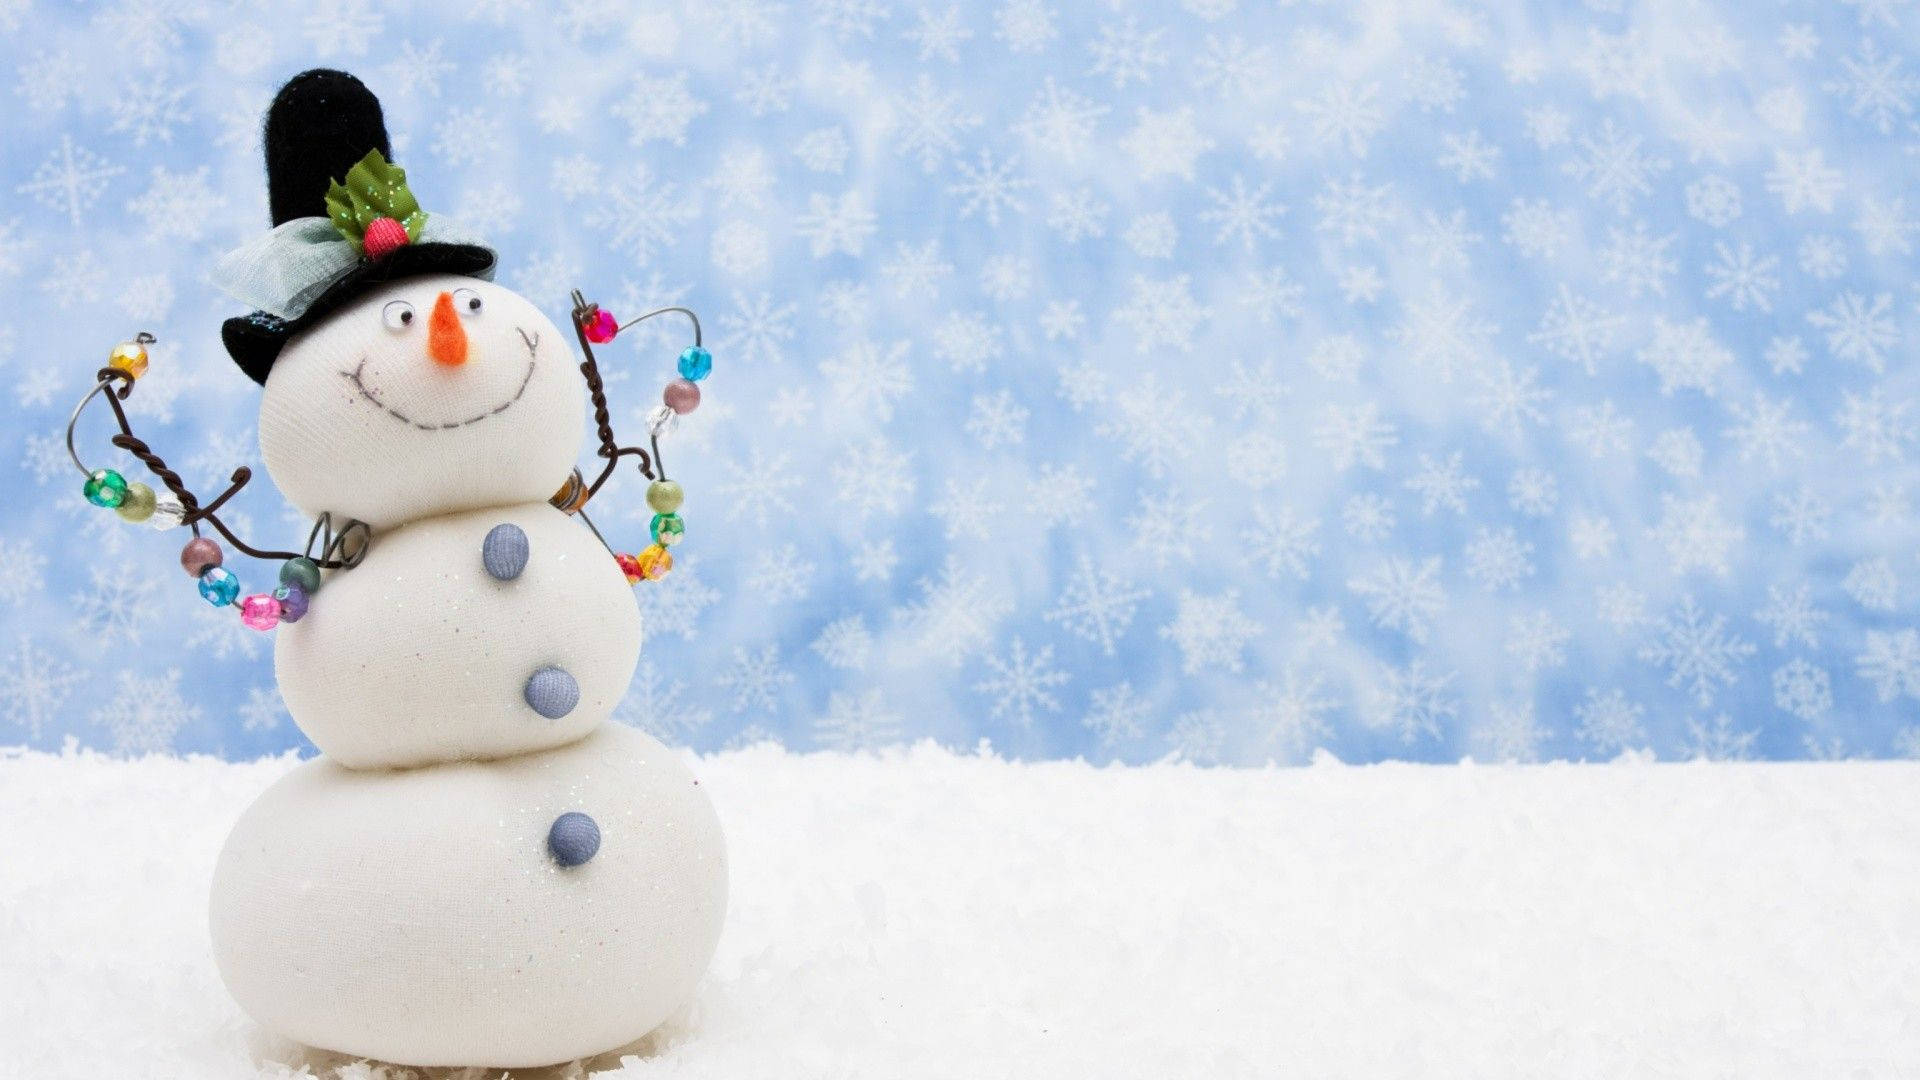 Snowman With Beads Wallpaper